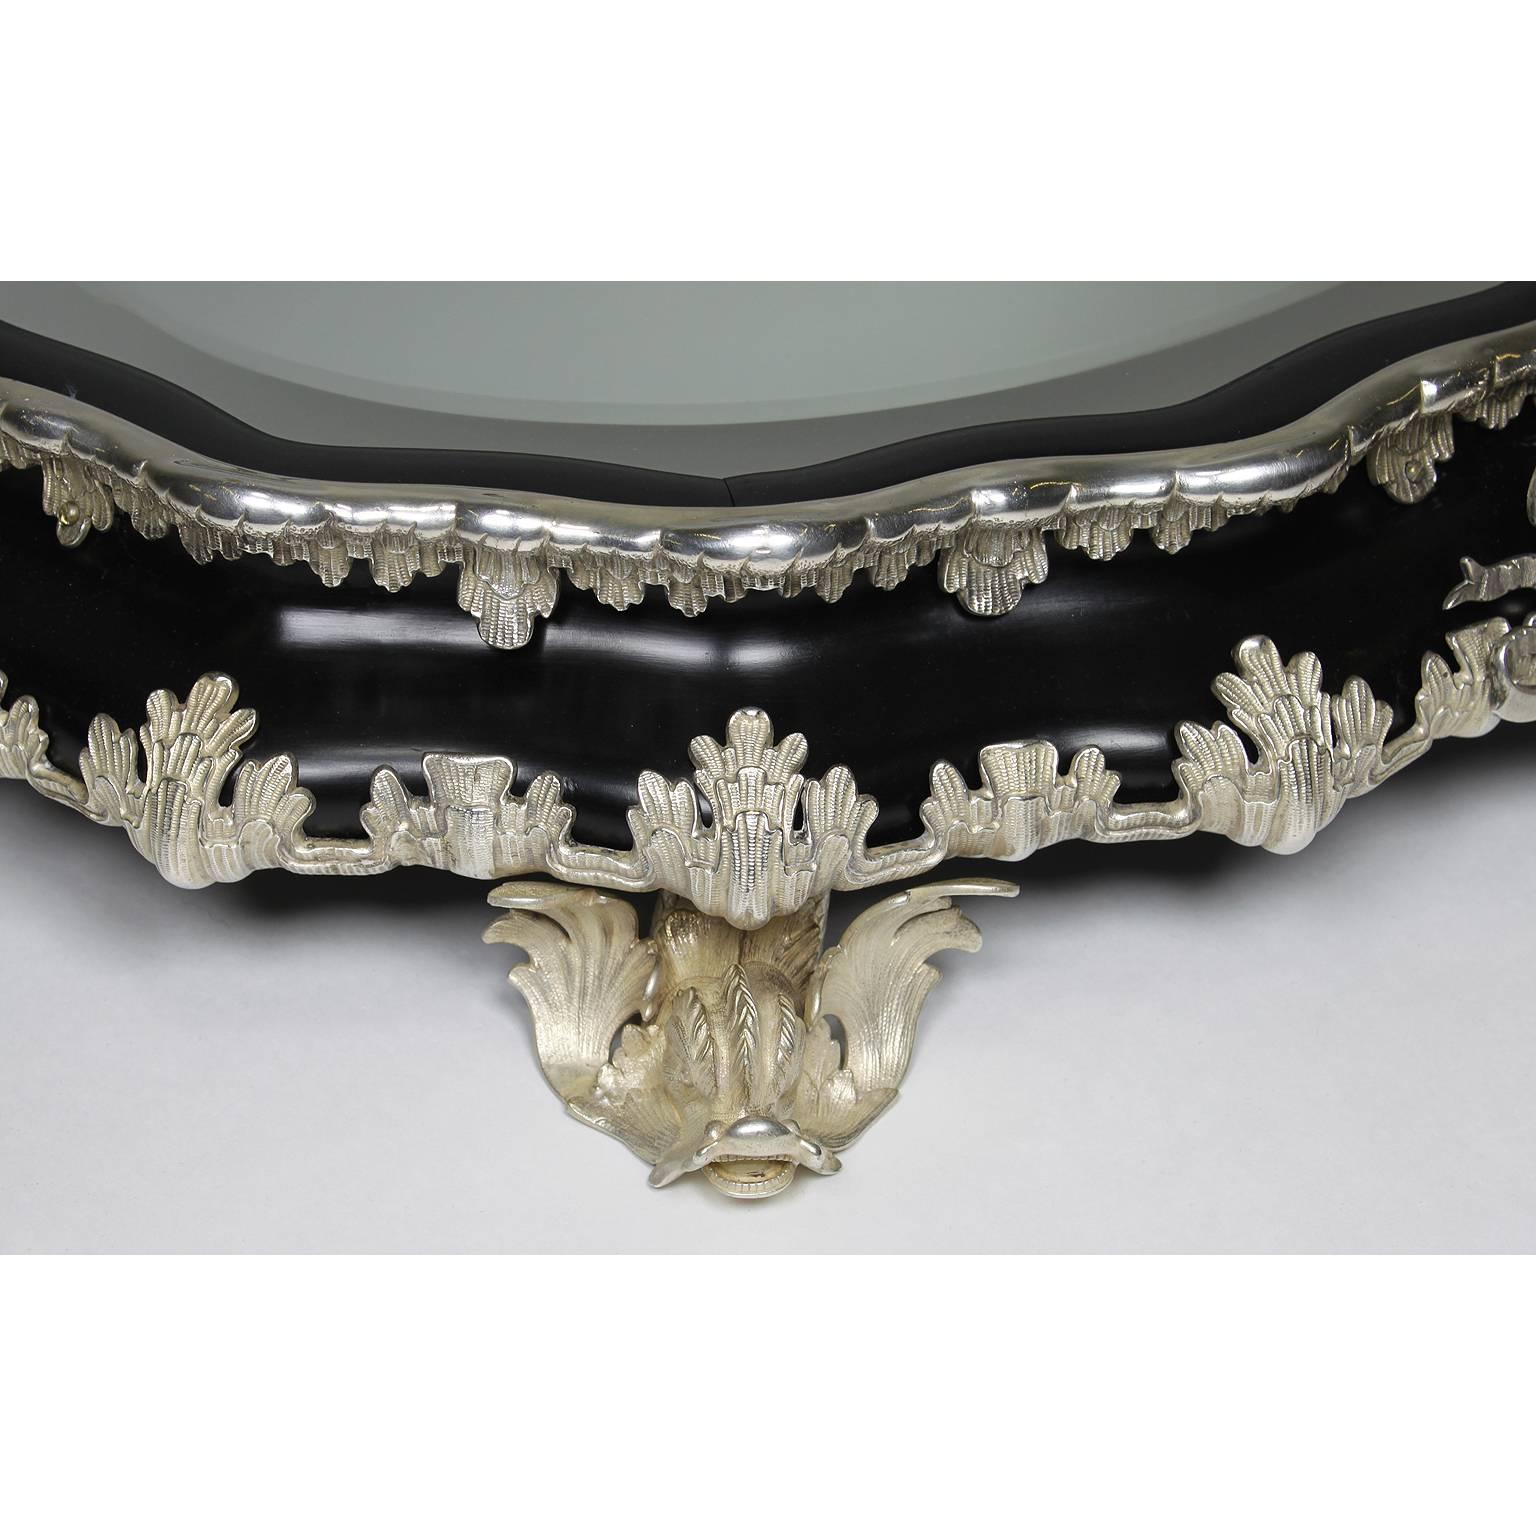 Early 20th Century A French 19th-20th Century Ebonized Wood & Plated Surtout de Table Centerpiece For Sale